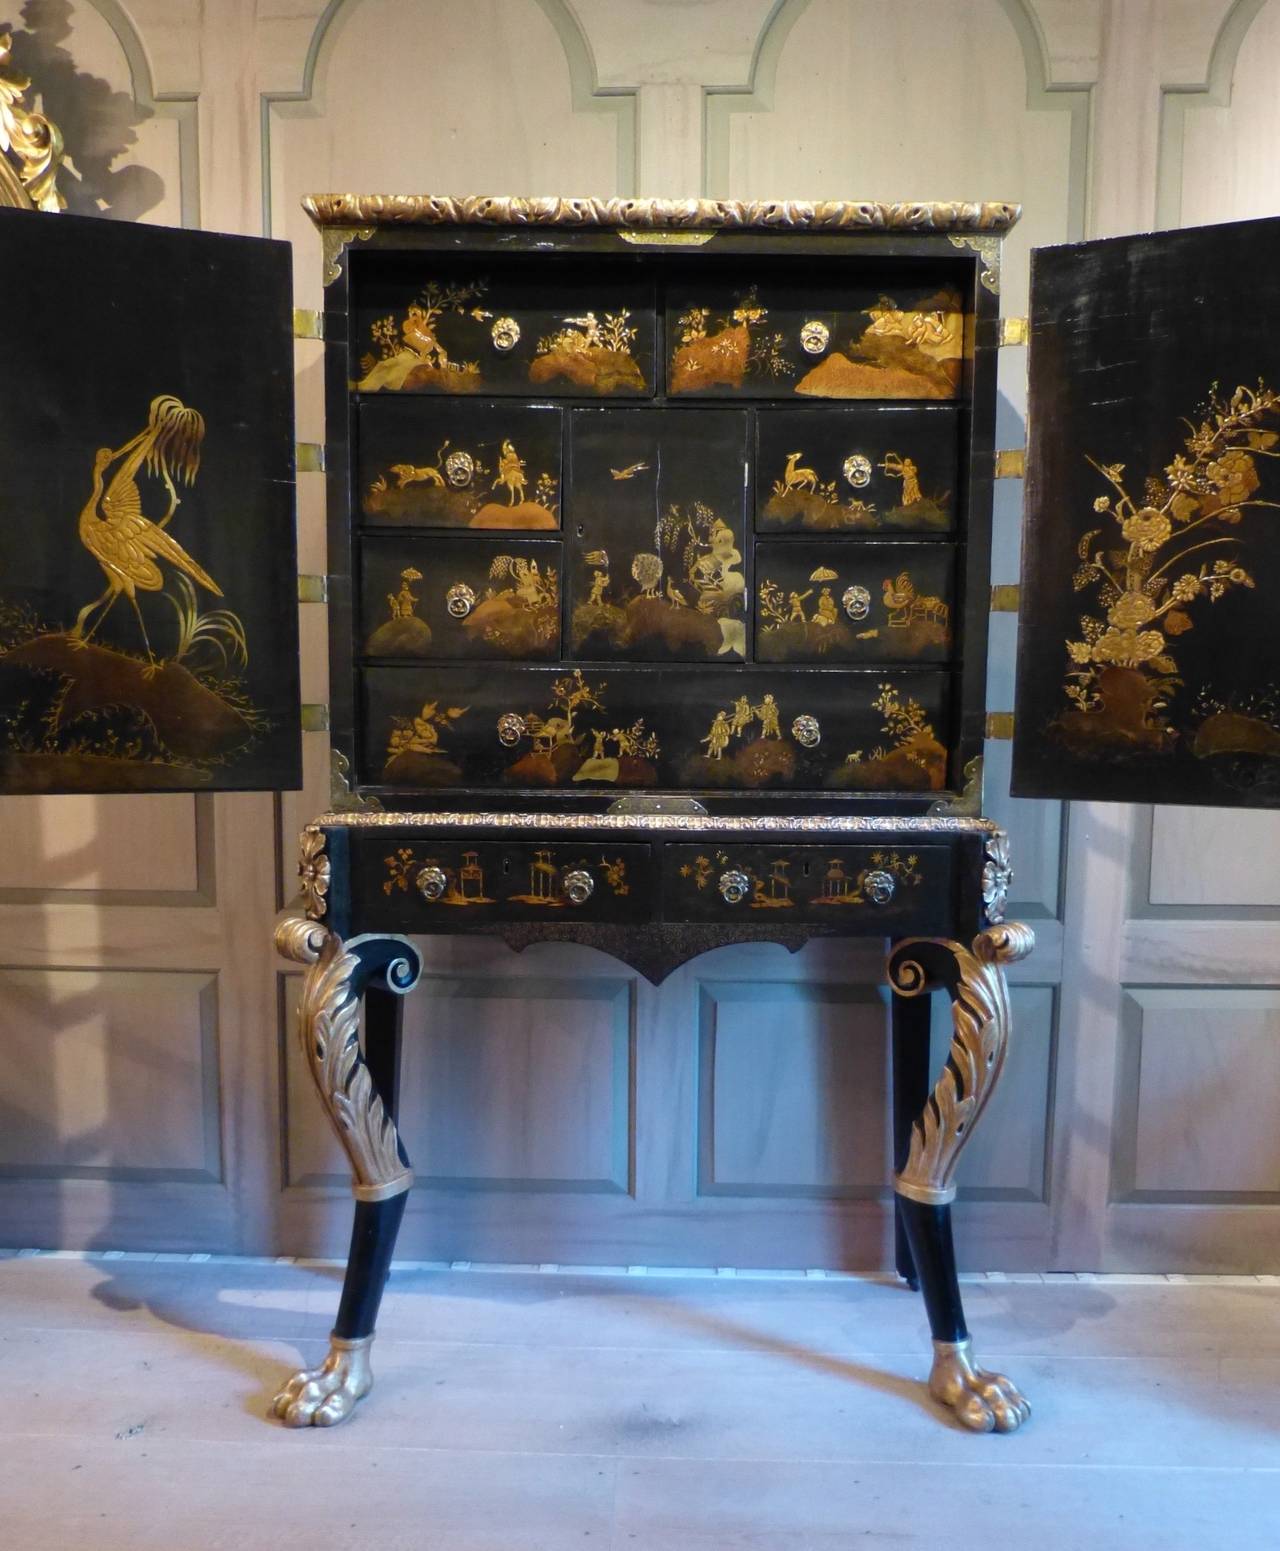 A fine Chinese export lacquer cabinet on Regency period carved ebonized and giltwood stand ending in lion's paw feet. The interior fully fitted with a bank of drawers displaying various scenes. The inside of the doors with a Fine depiction of a